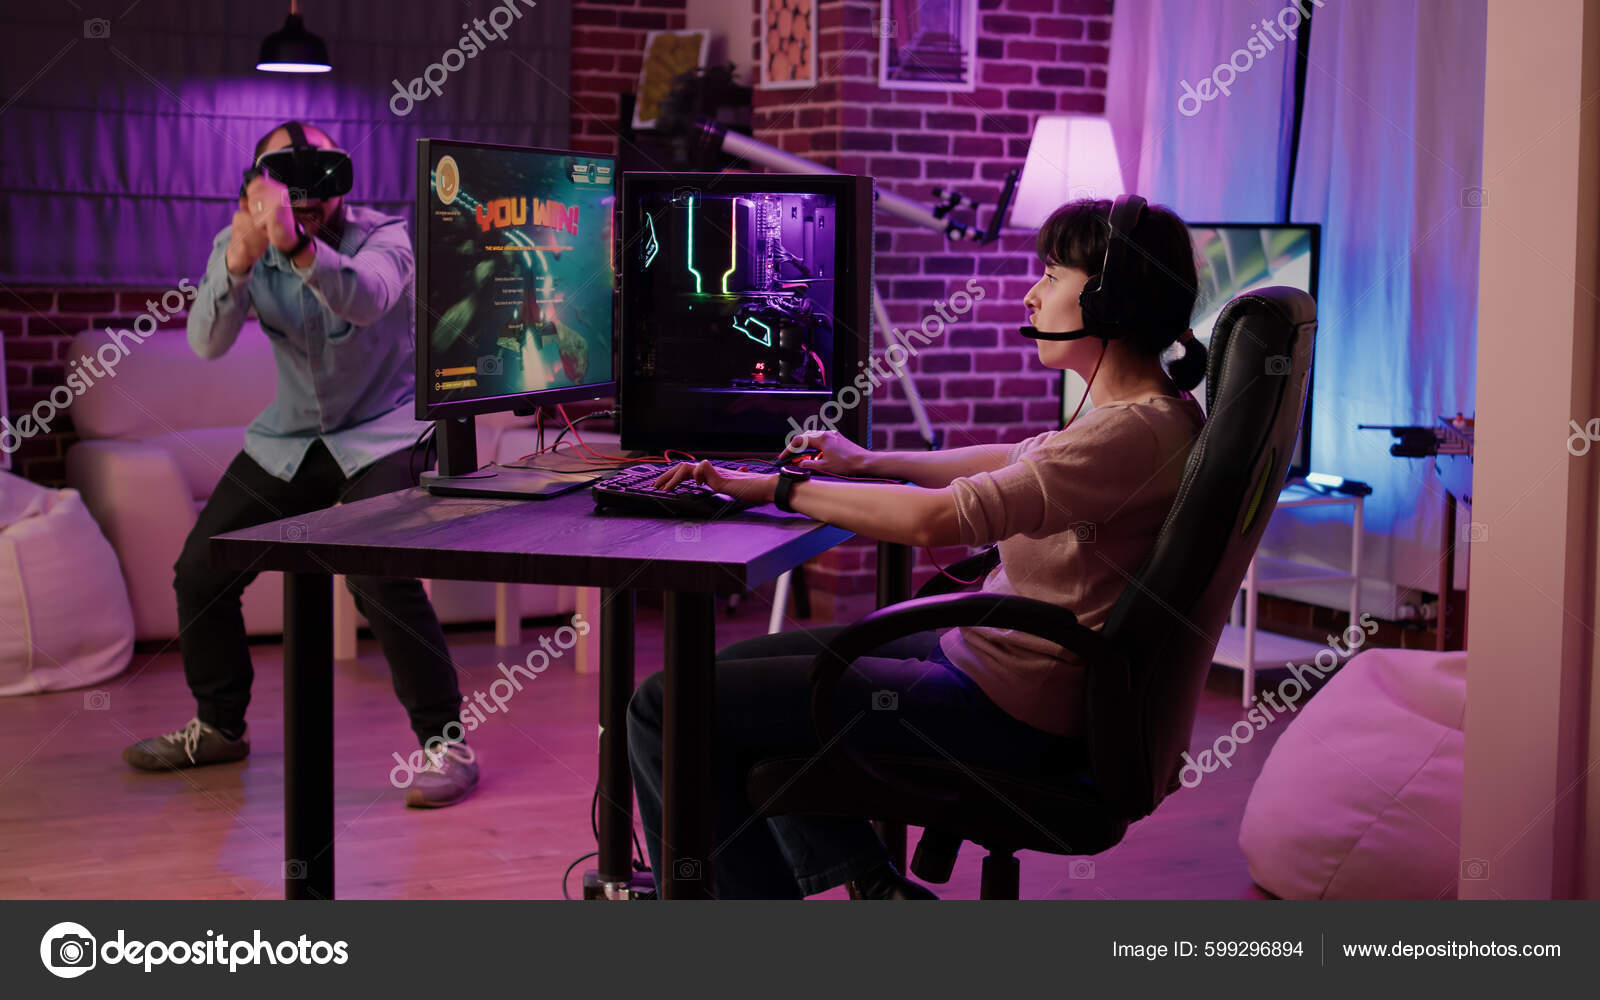 Gamer Girl Celebrating Victory Action Space Simulation Game While Boyfriend Stock Photo by ©DragosCondreaW 599296894